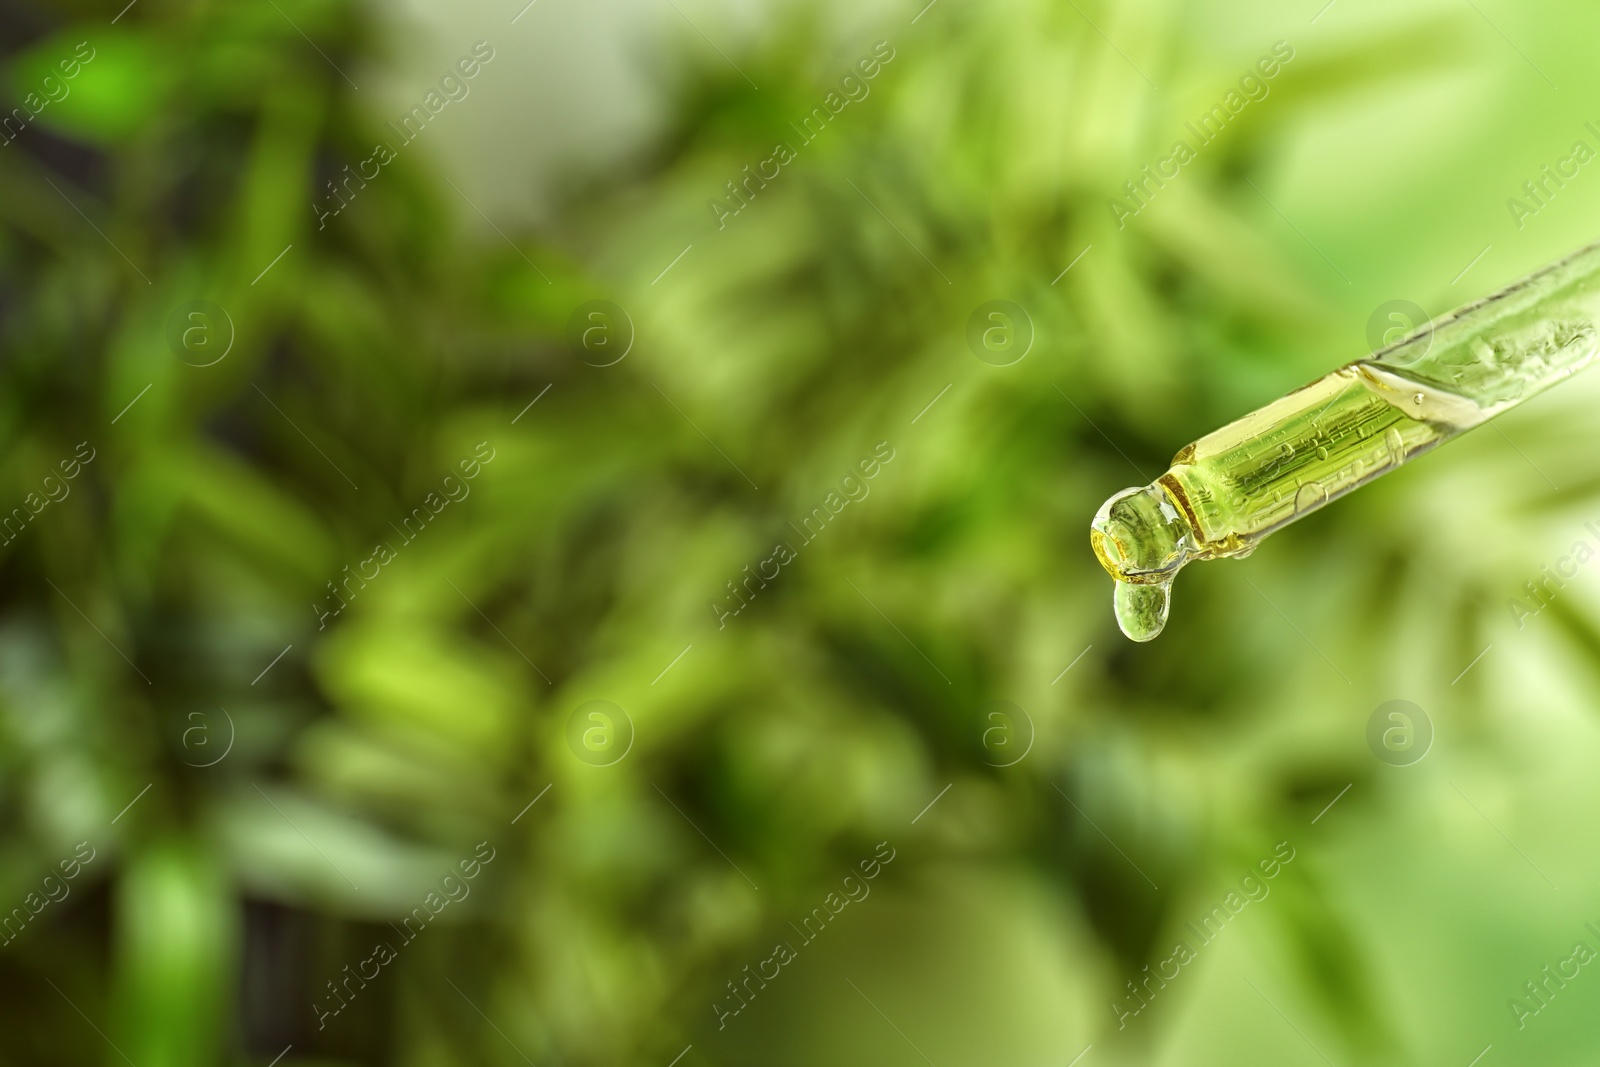 Photo of Dropper with essential oil on blurred background